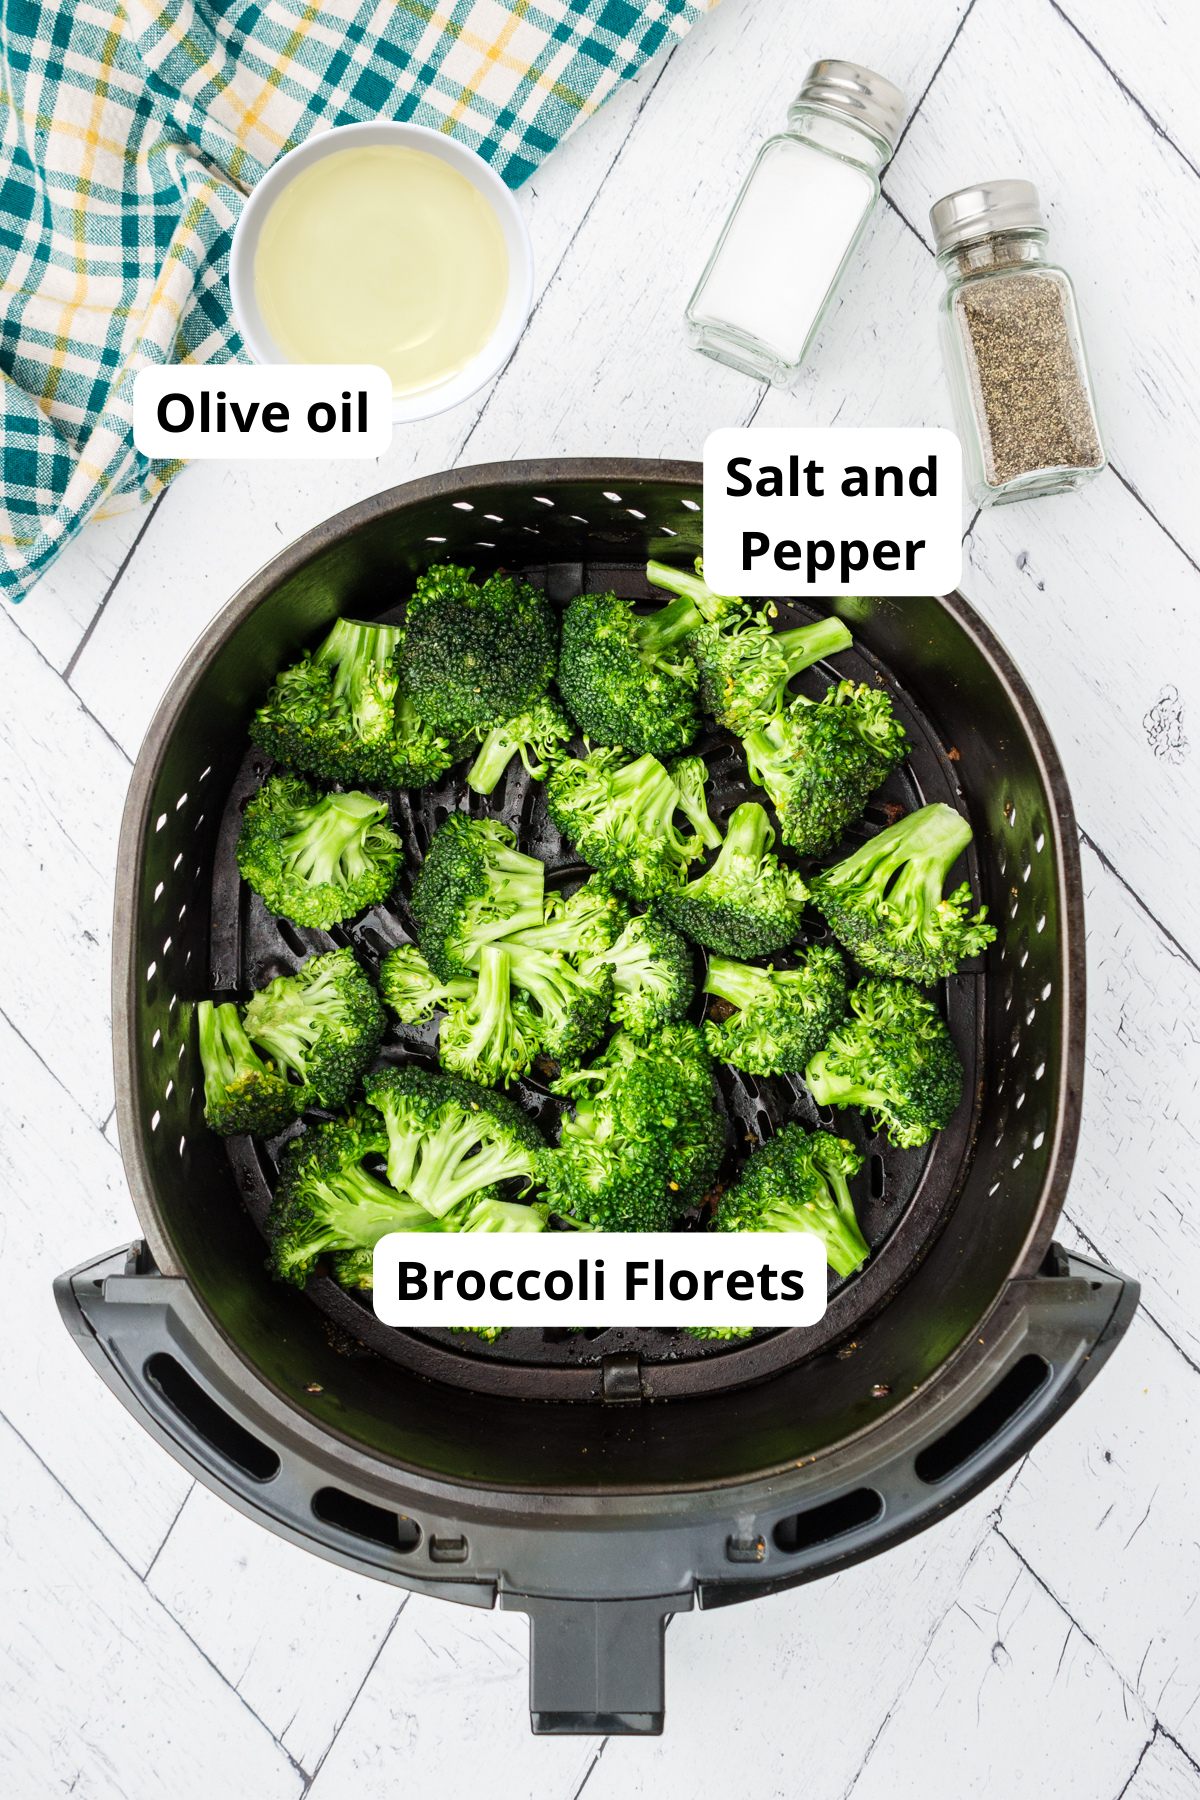 picture showing ingredients for this roasted broccoli recipe including broccoli, olive oil, salt and pepper